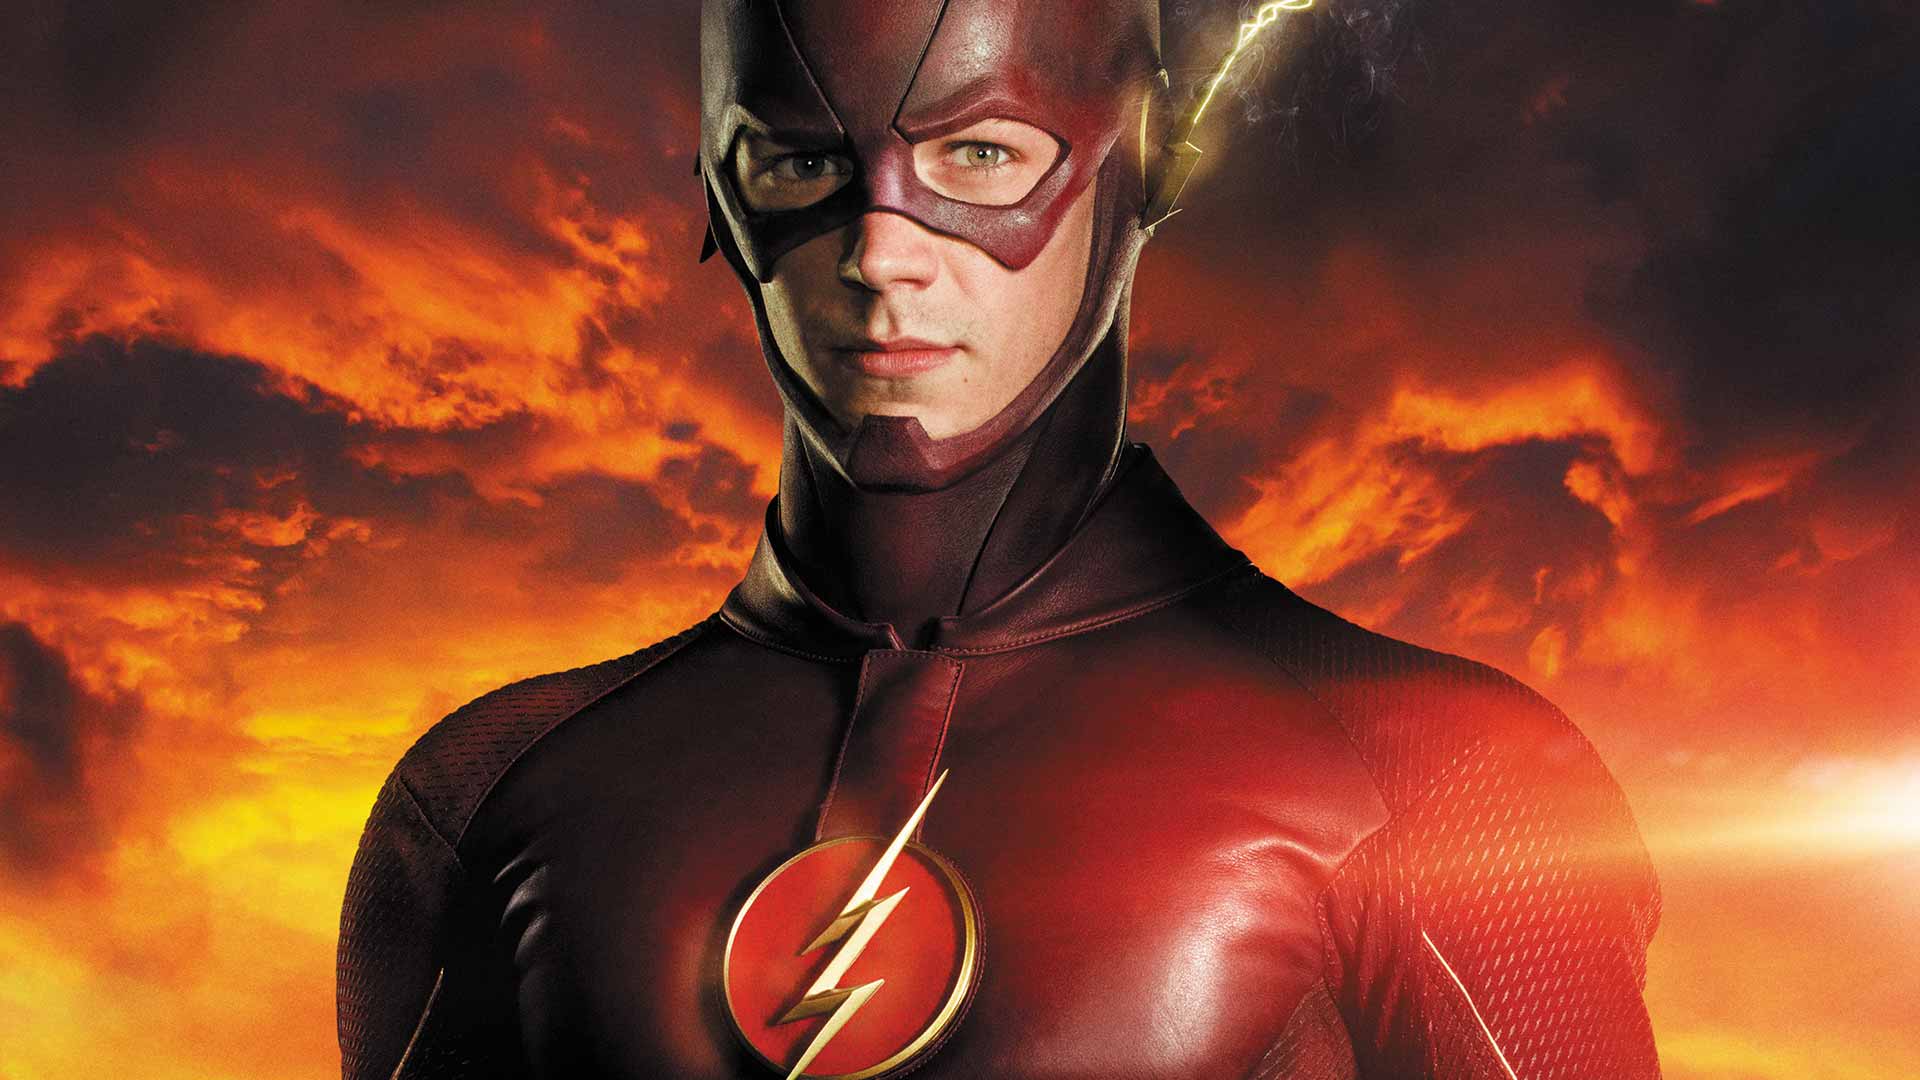 Grant Gustin Says The Flash Season 5 Premiere Is The Best Premiere